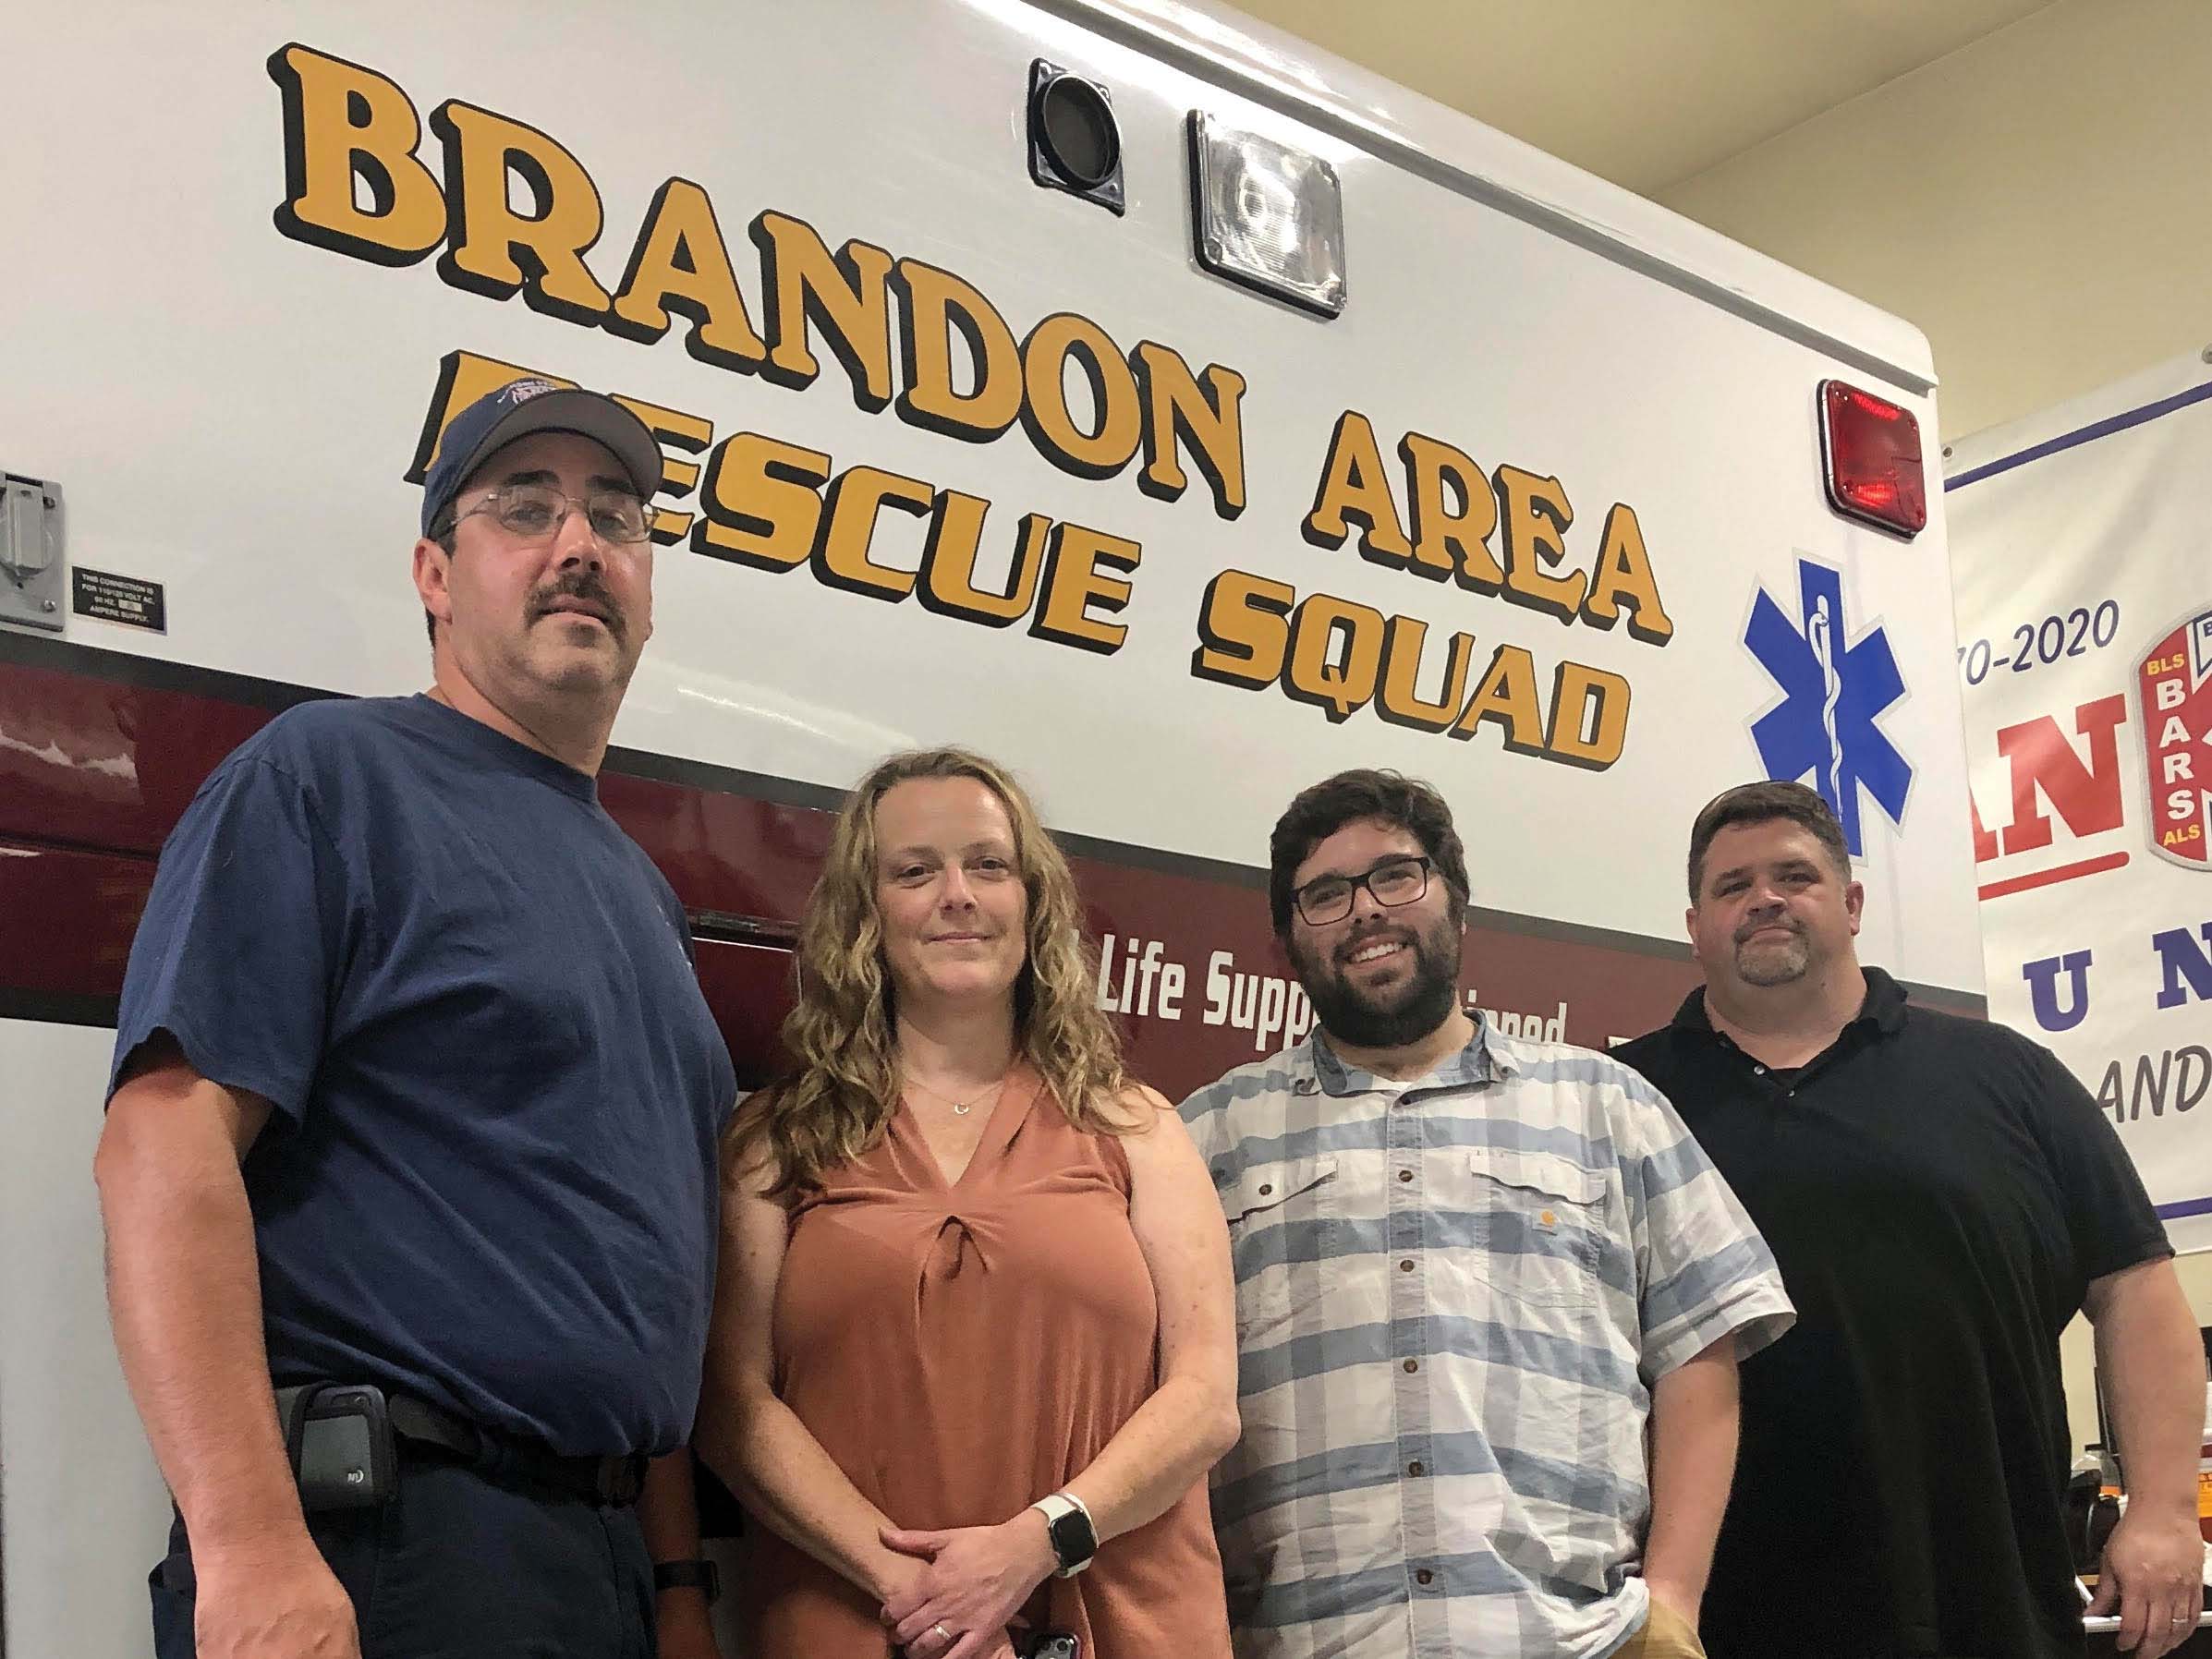 Volunteers needed: Brandon Fire and Rescue sound staffing alarm